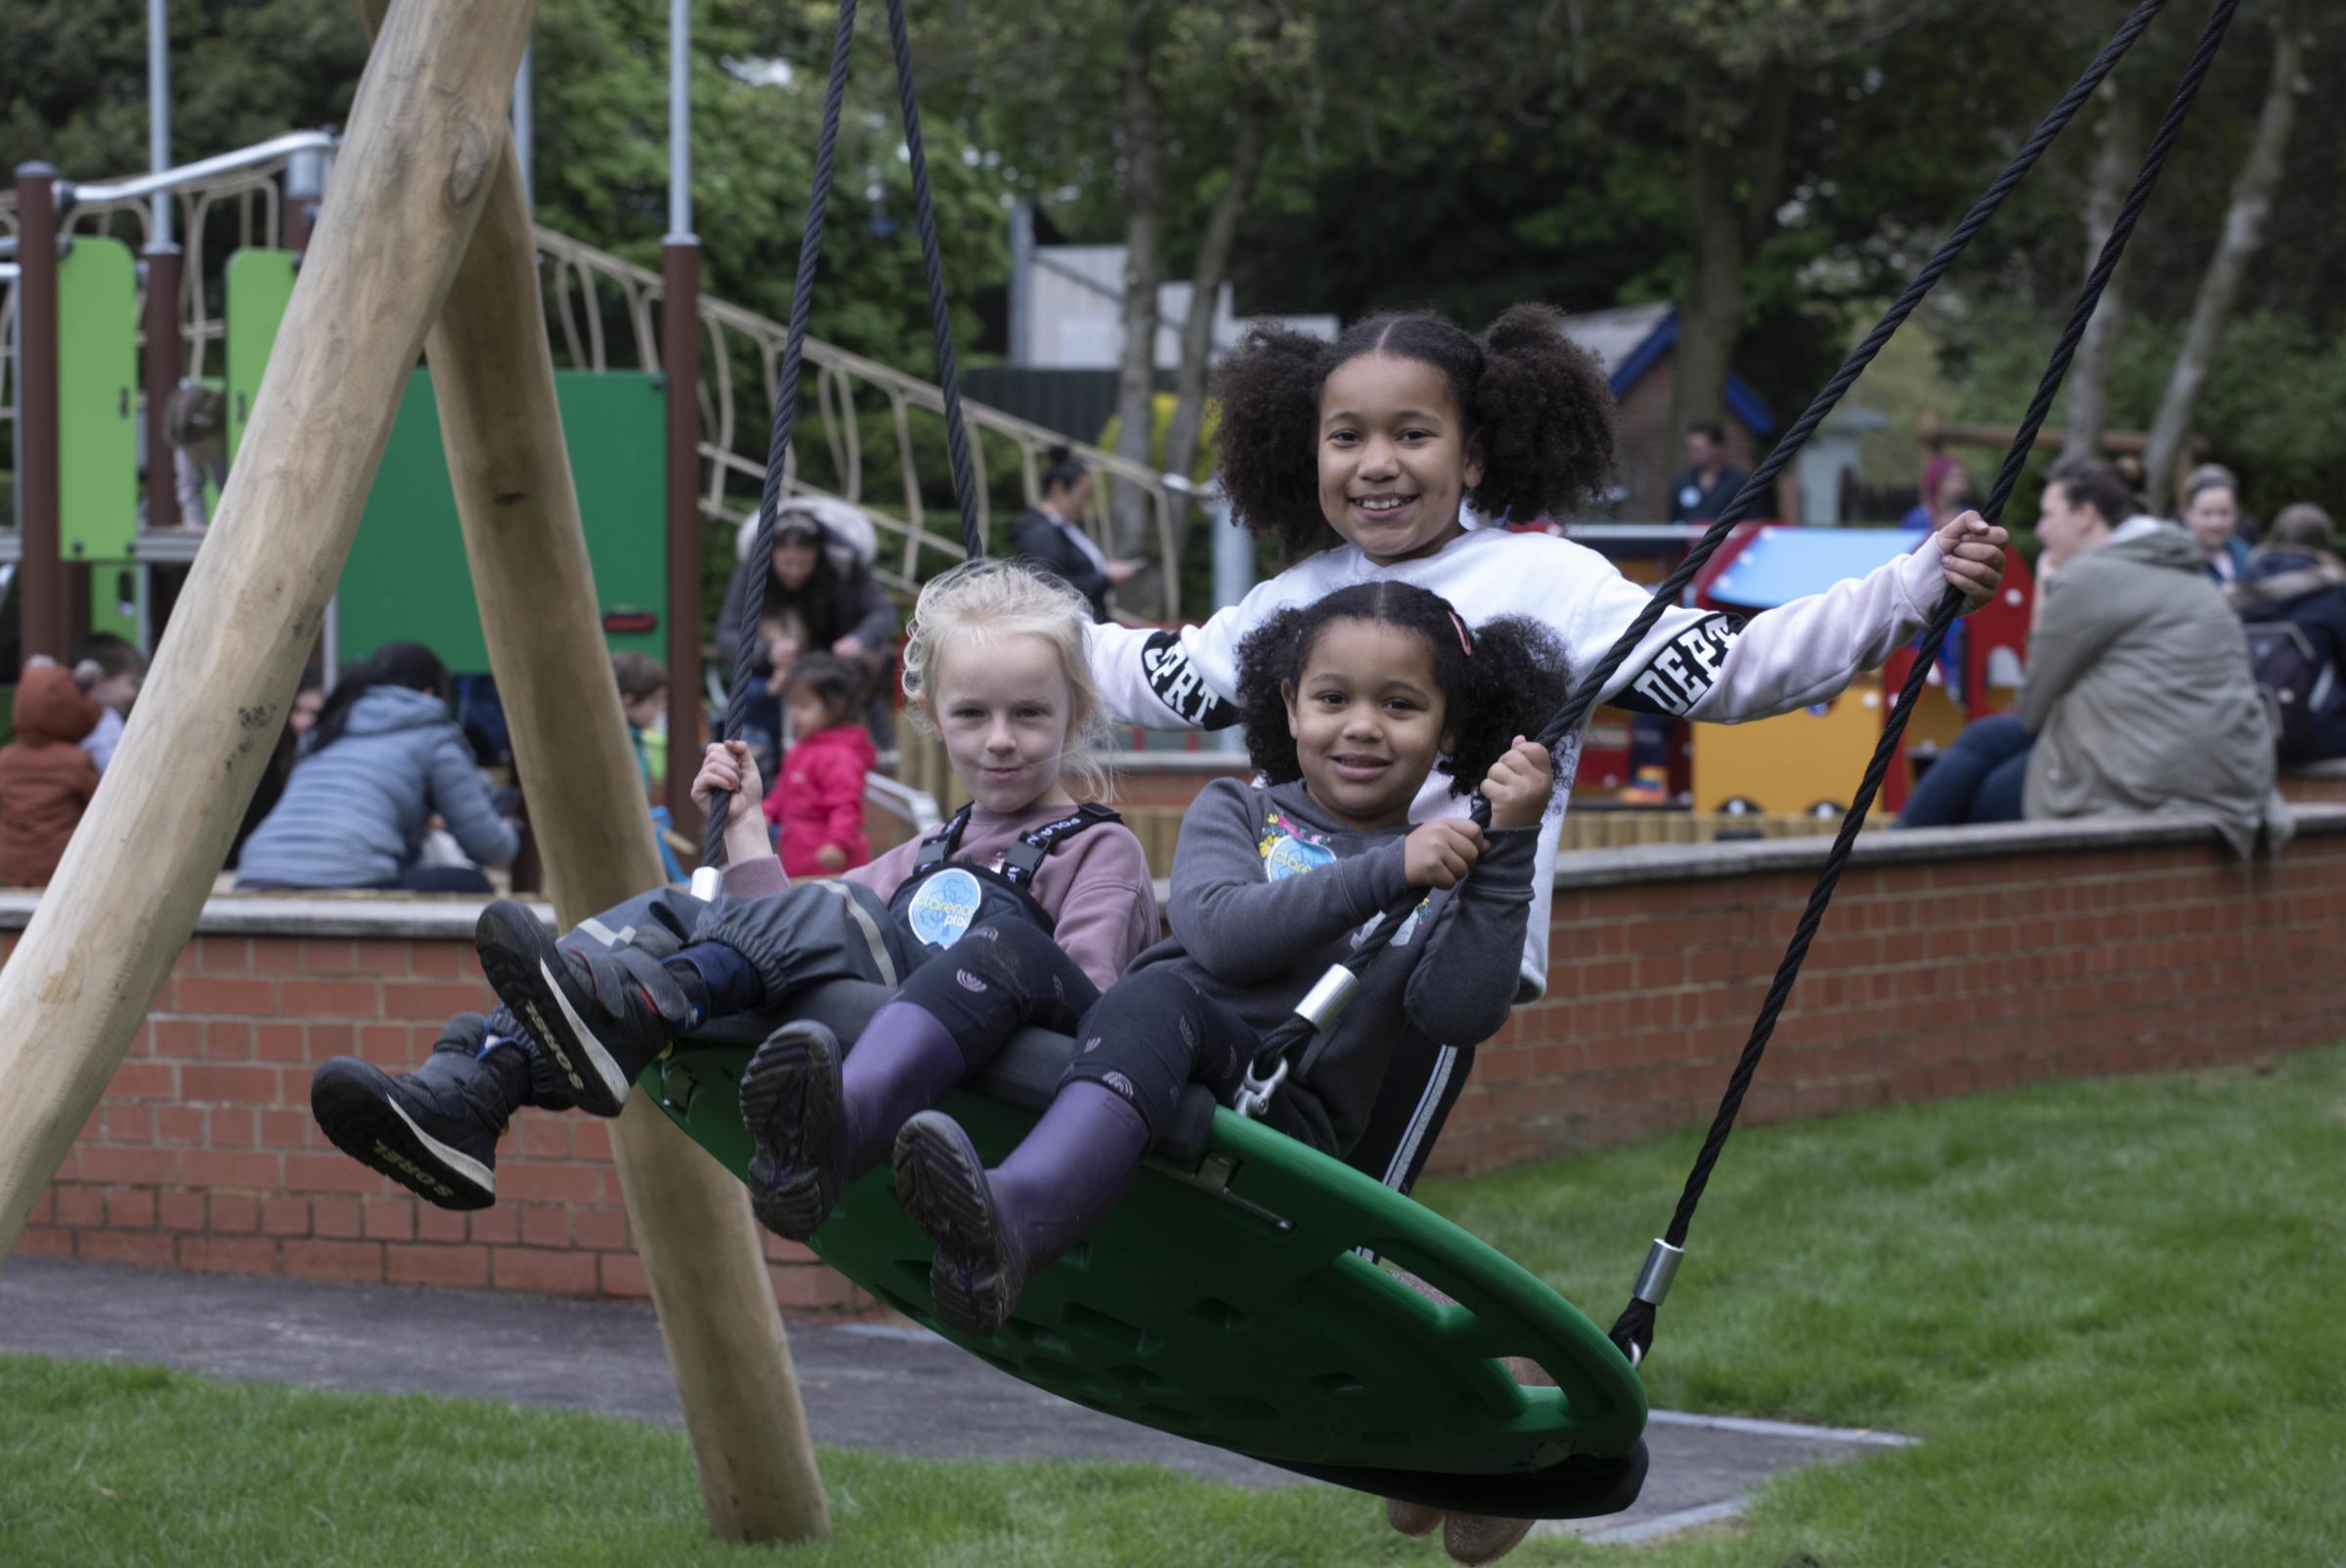 Children enjoying one of the new attractions. Credit: St Albans District Council